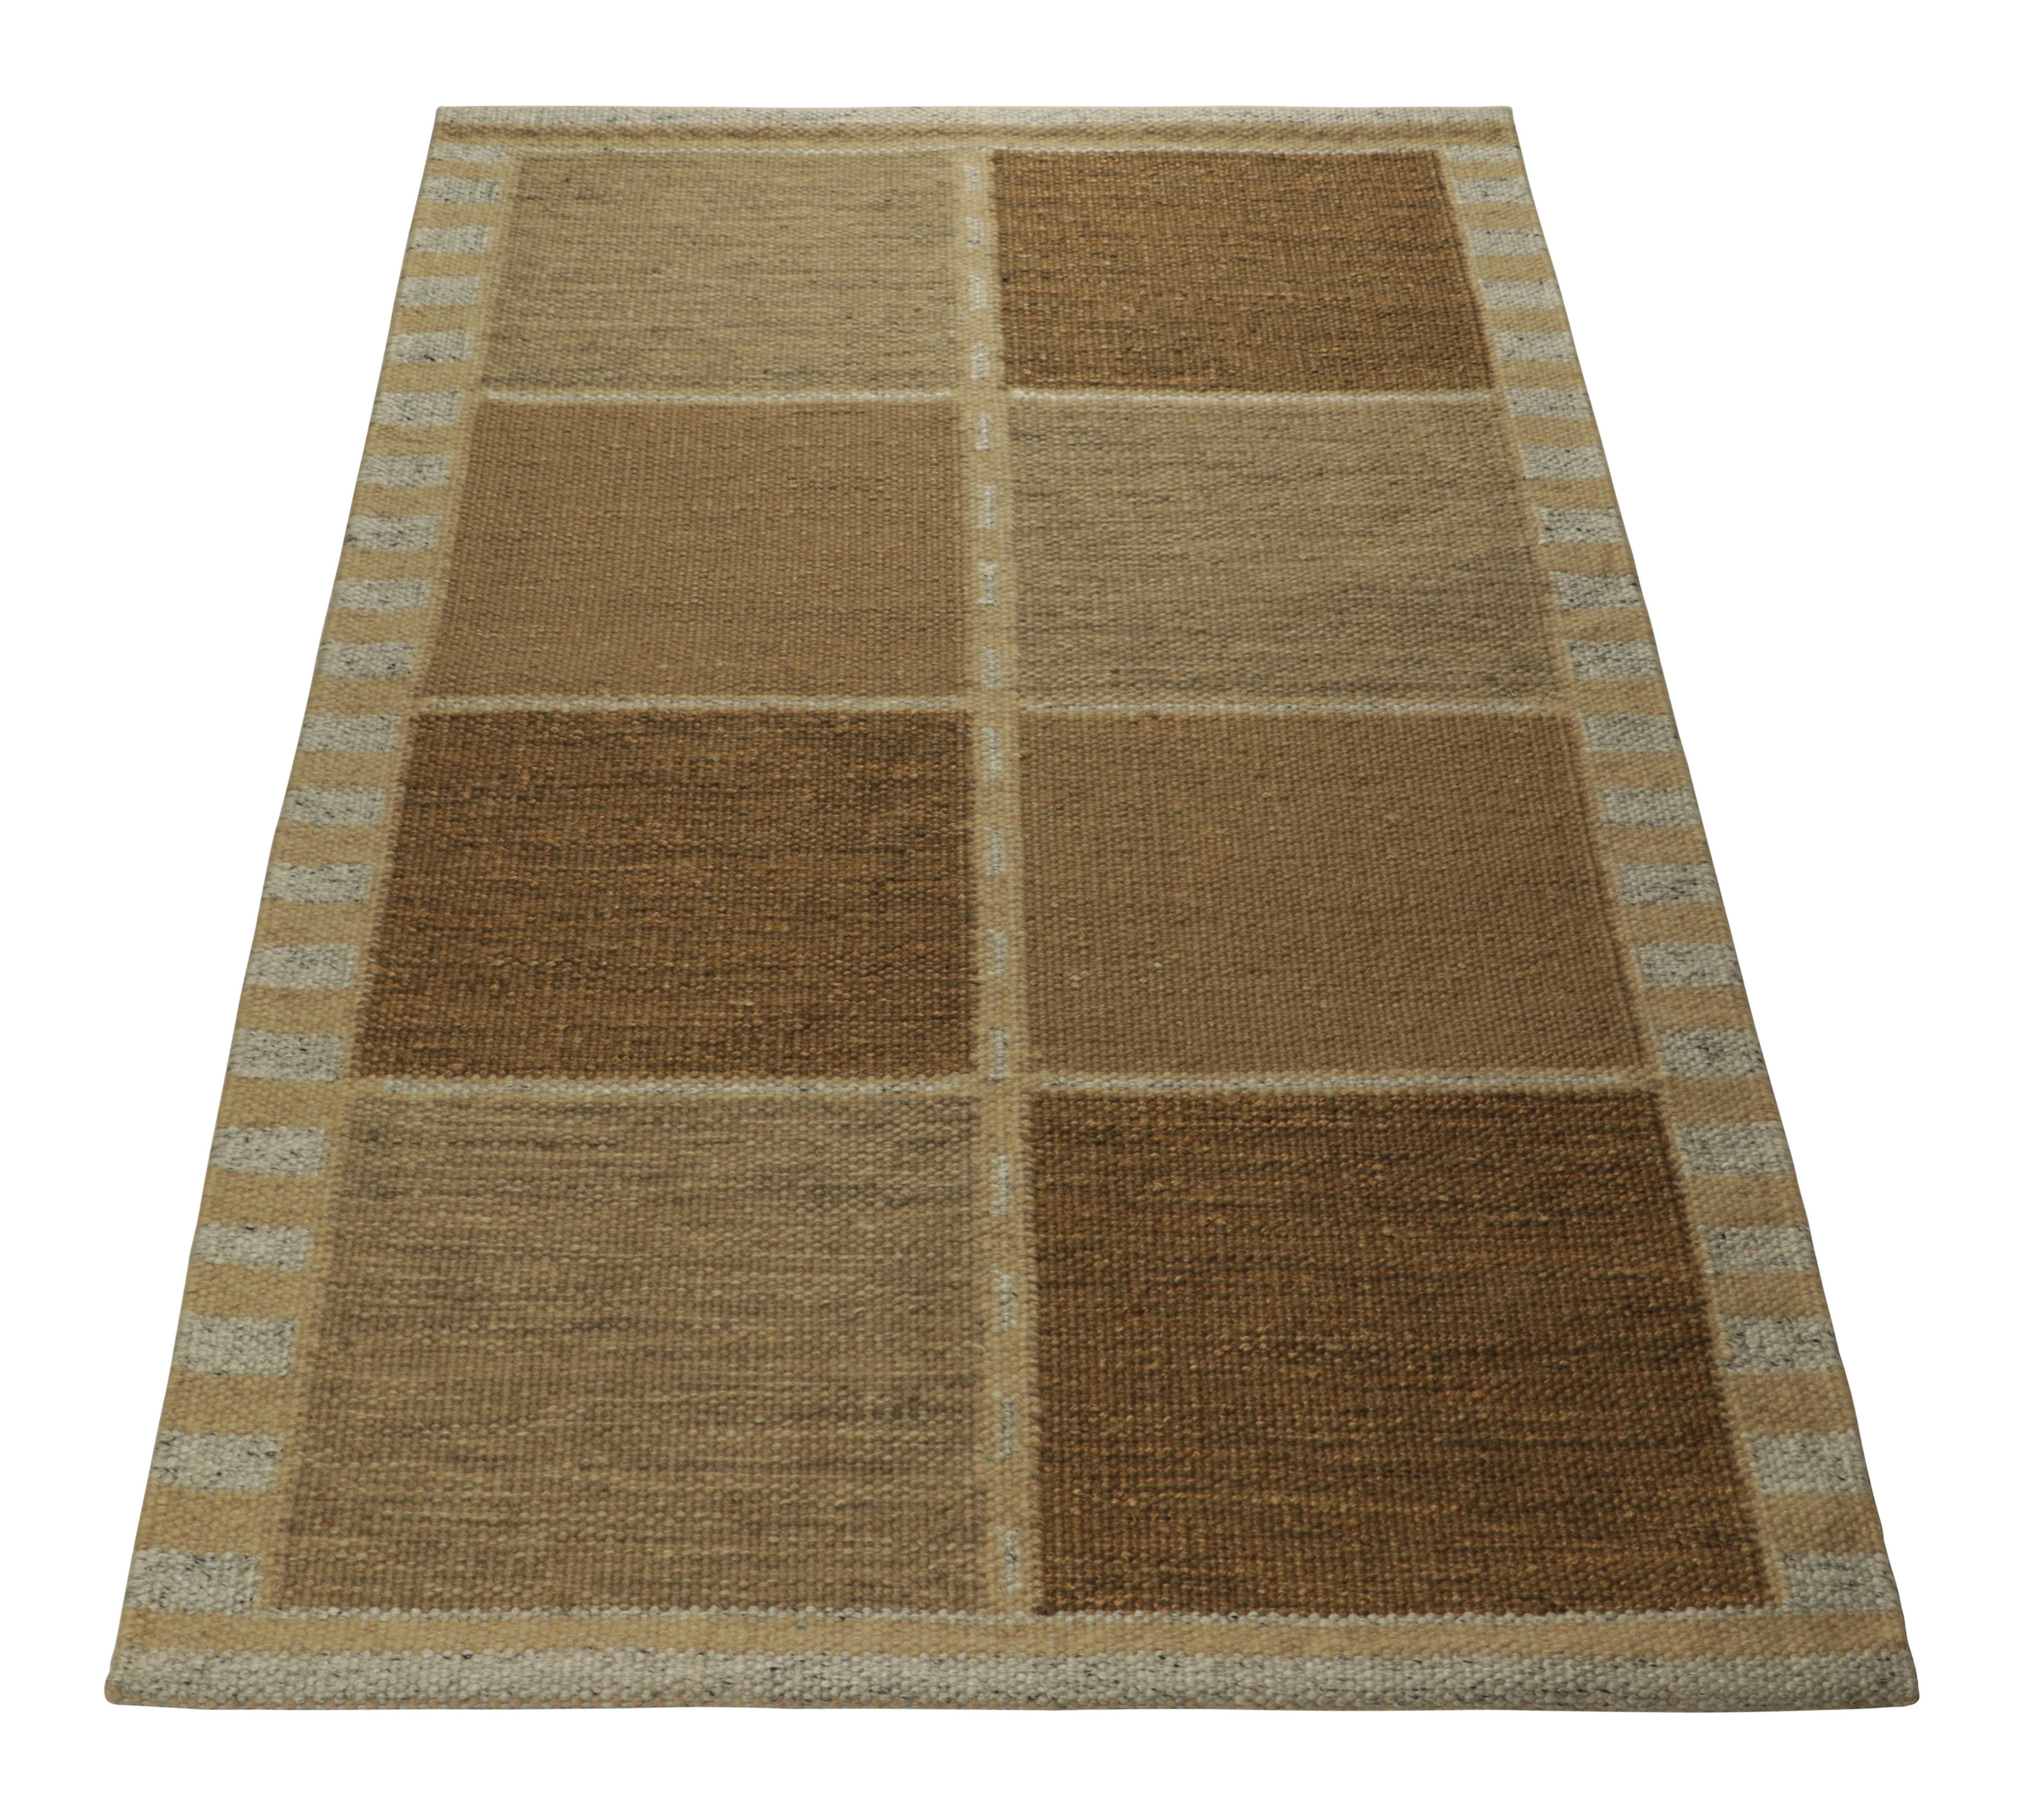 Hand-Woven Rug & Kilim’s Scandinavian Style Rug in Beige-Brown, with Blue Geometric Pattern For Sale